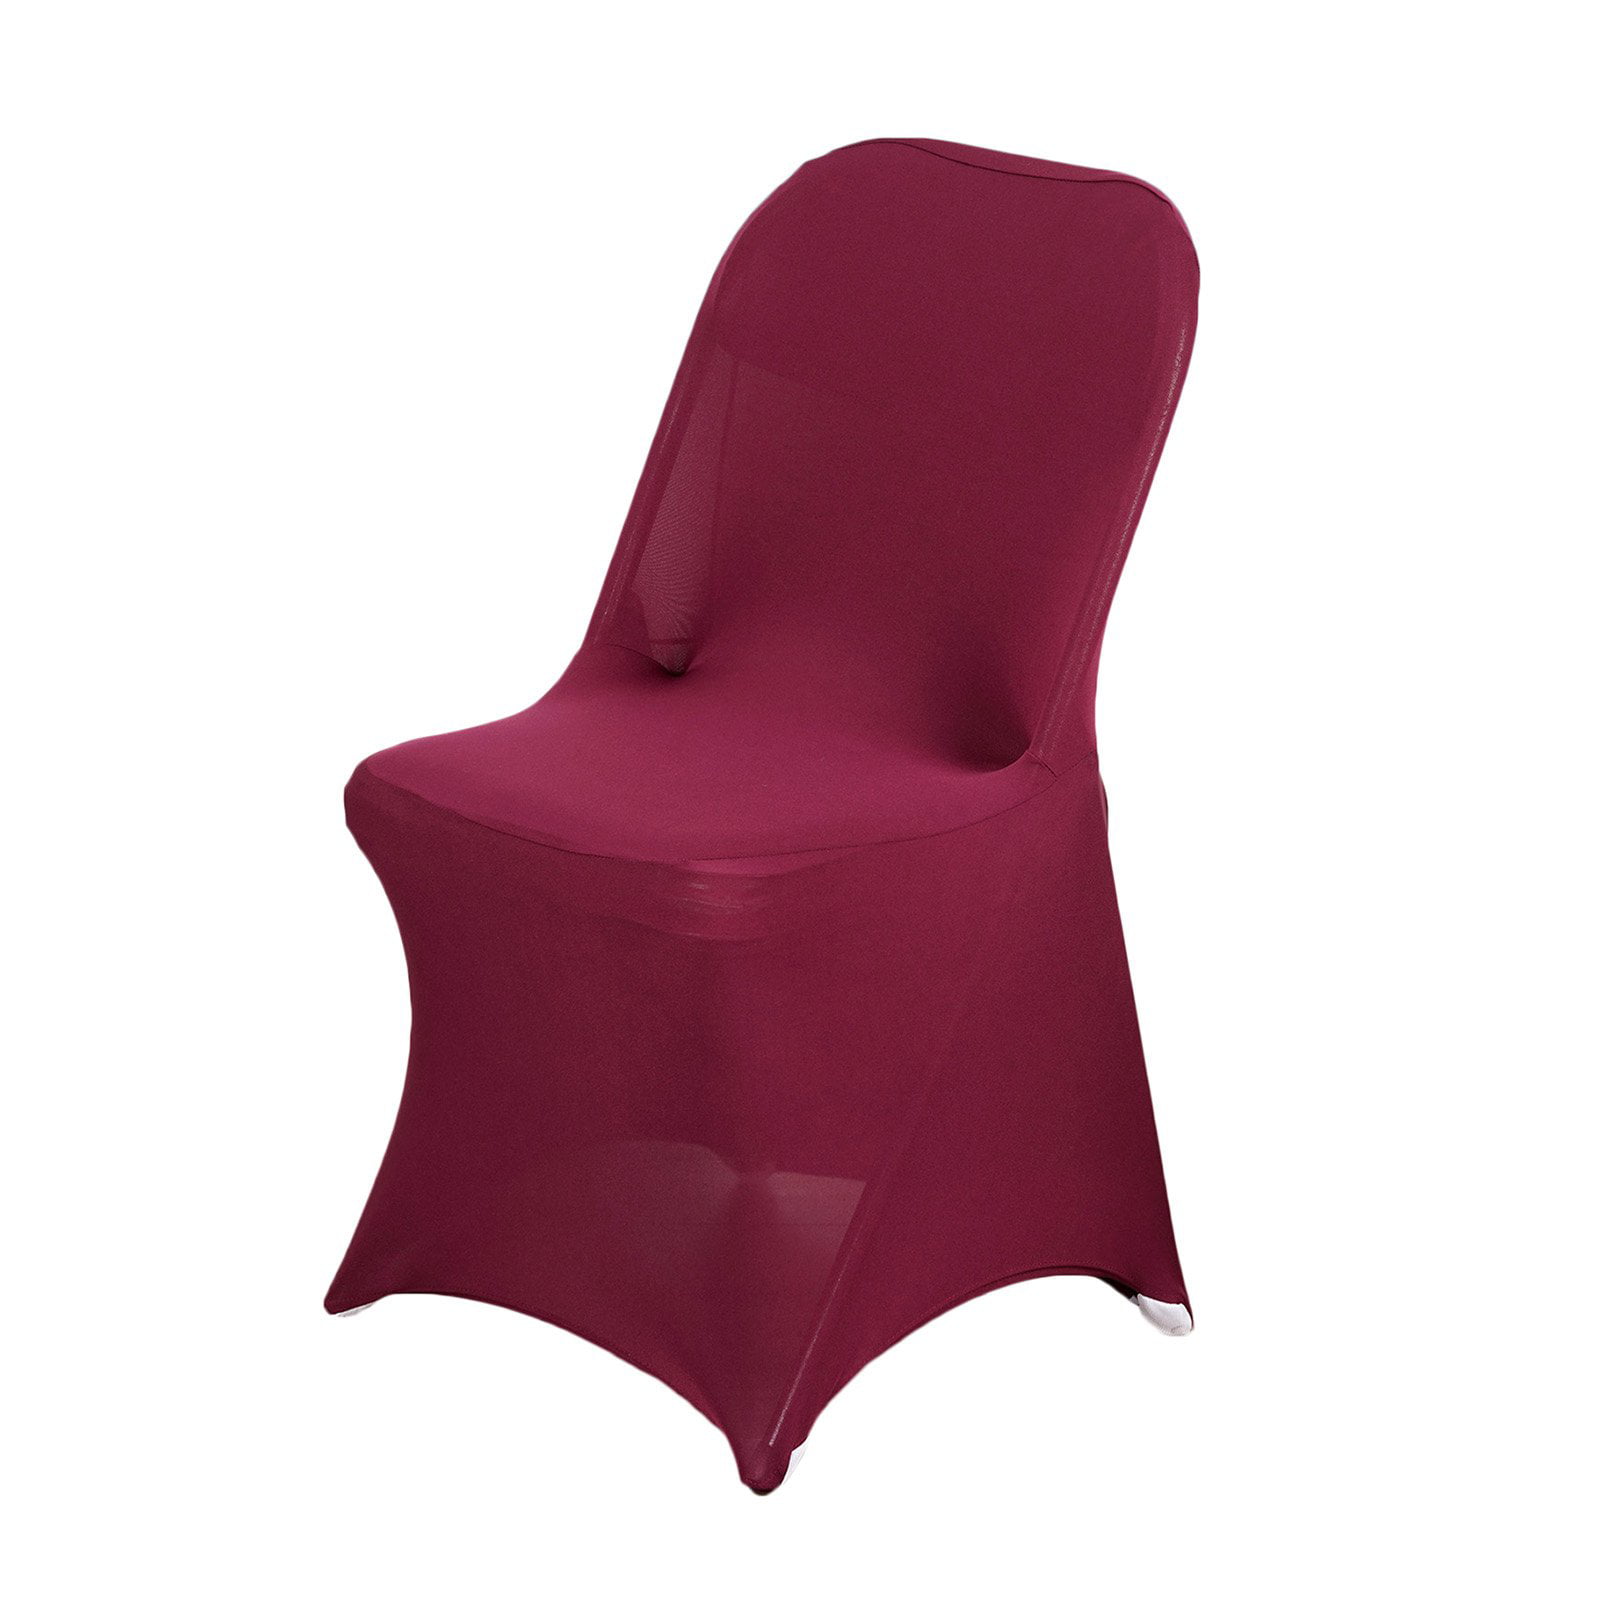 Efavormart Stretchy Spandex Fitted Folding Chair Cover Dinning Event Slipcover For Wedding Party Banquet Catering- Burgundy